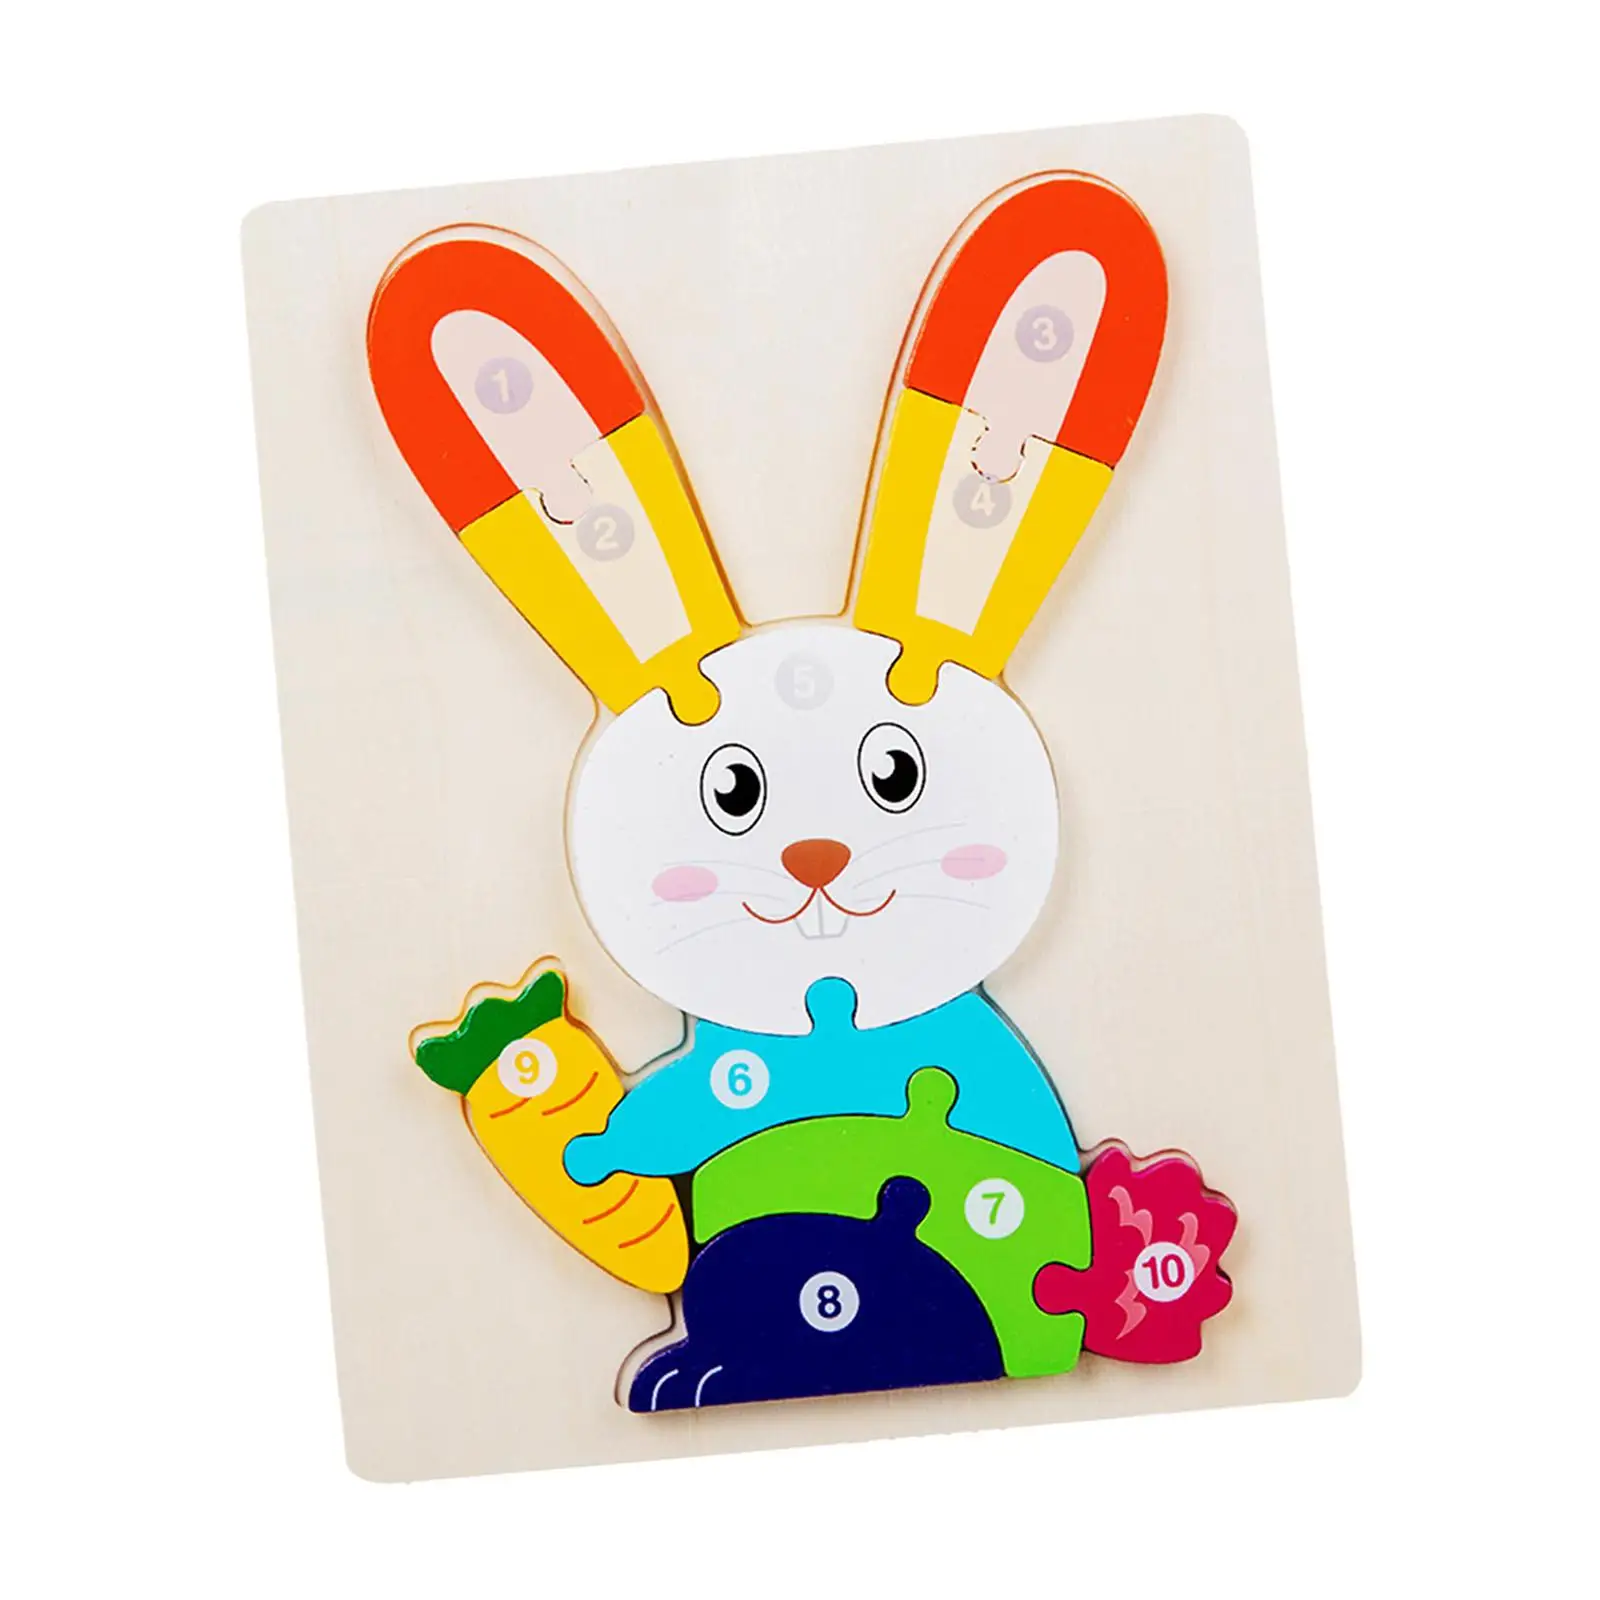 

Montessori Toy Wooden Jigsaw Puzzle Educational Numbered Puzzles Fine Motor Skills Rabbit Shape for Preshcool Toddlers Kids